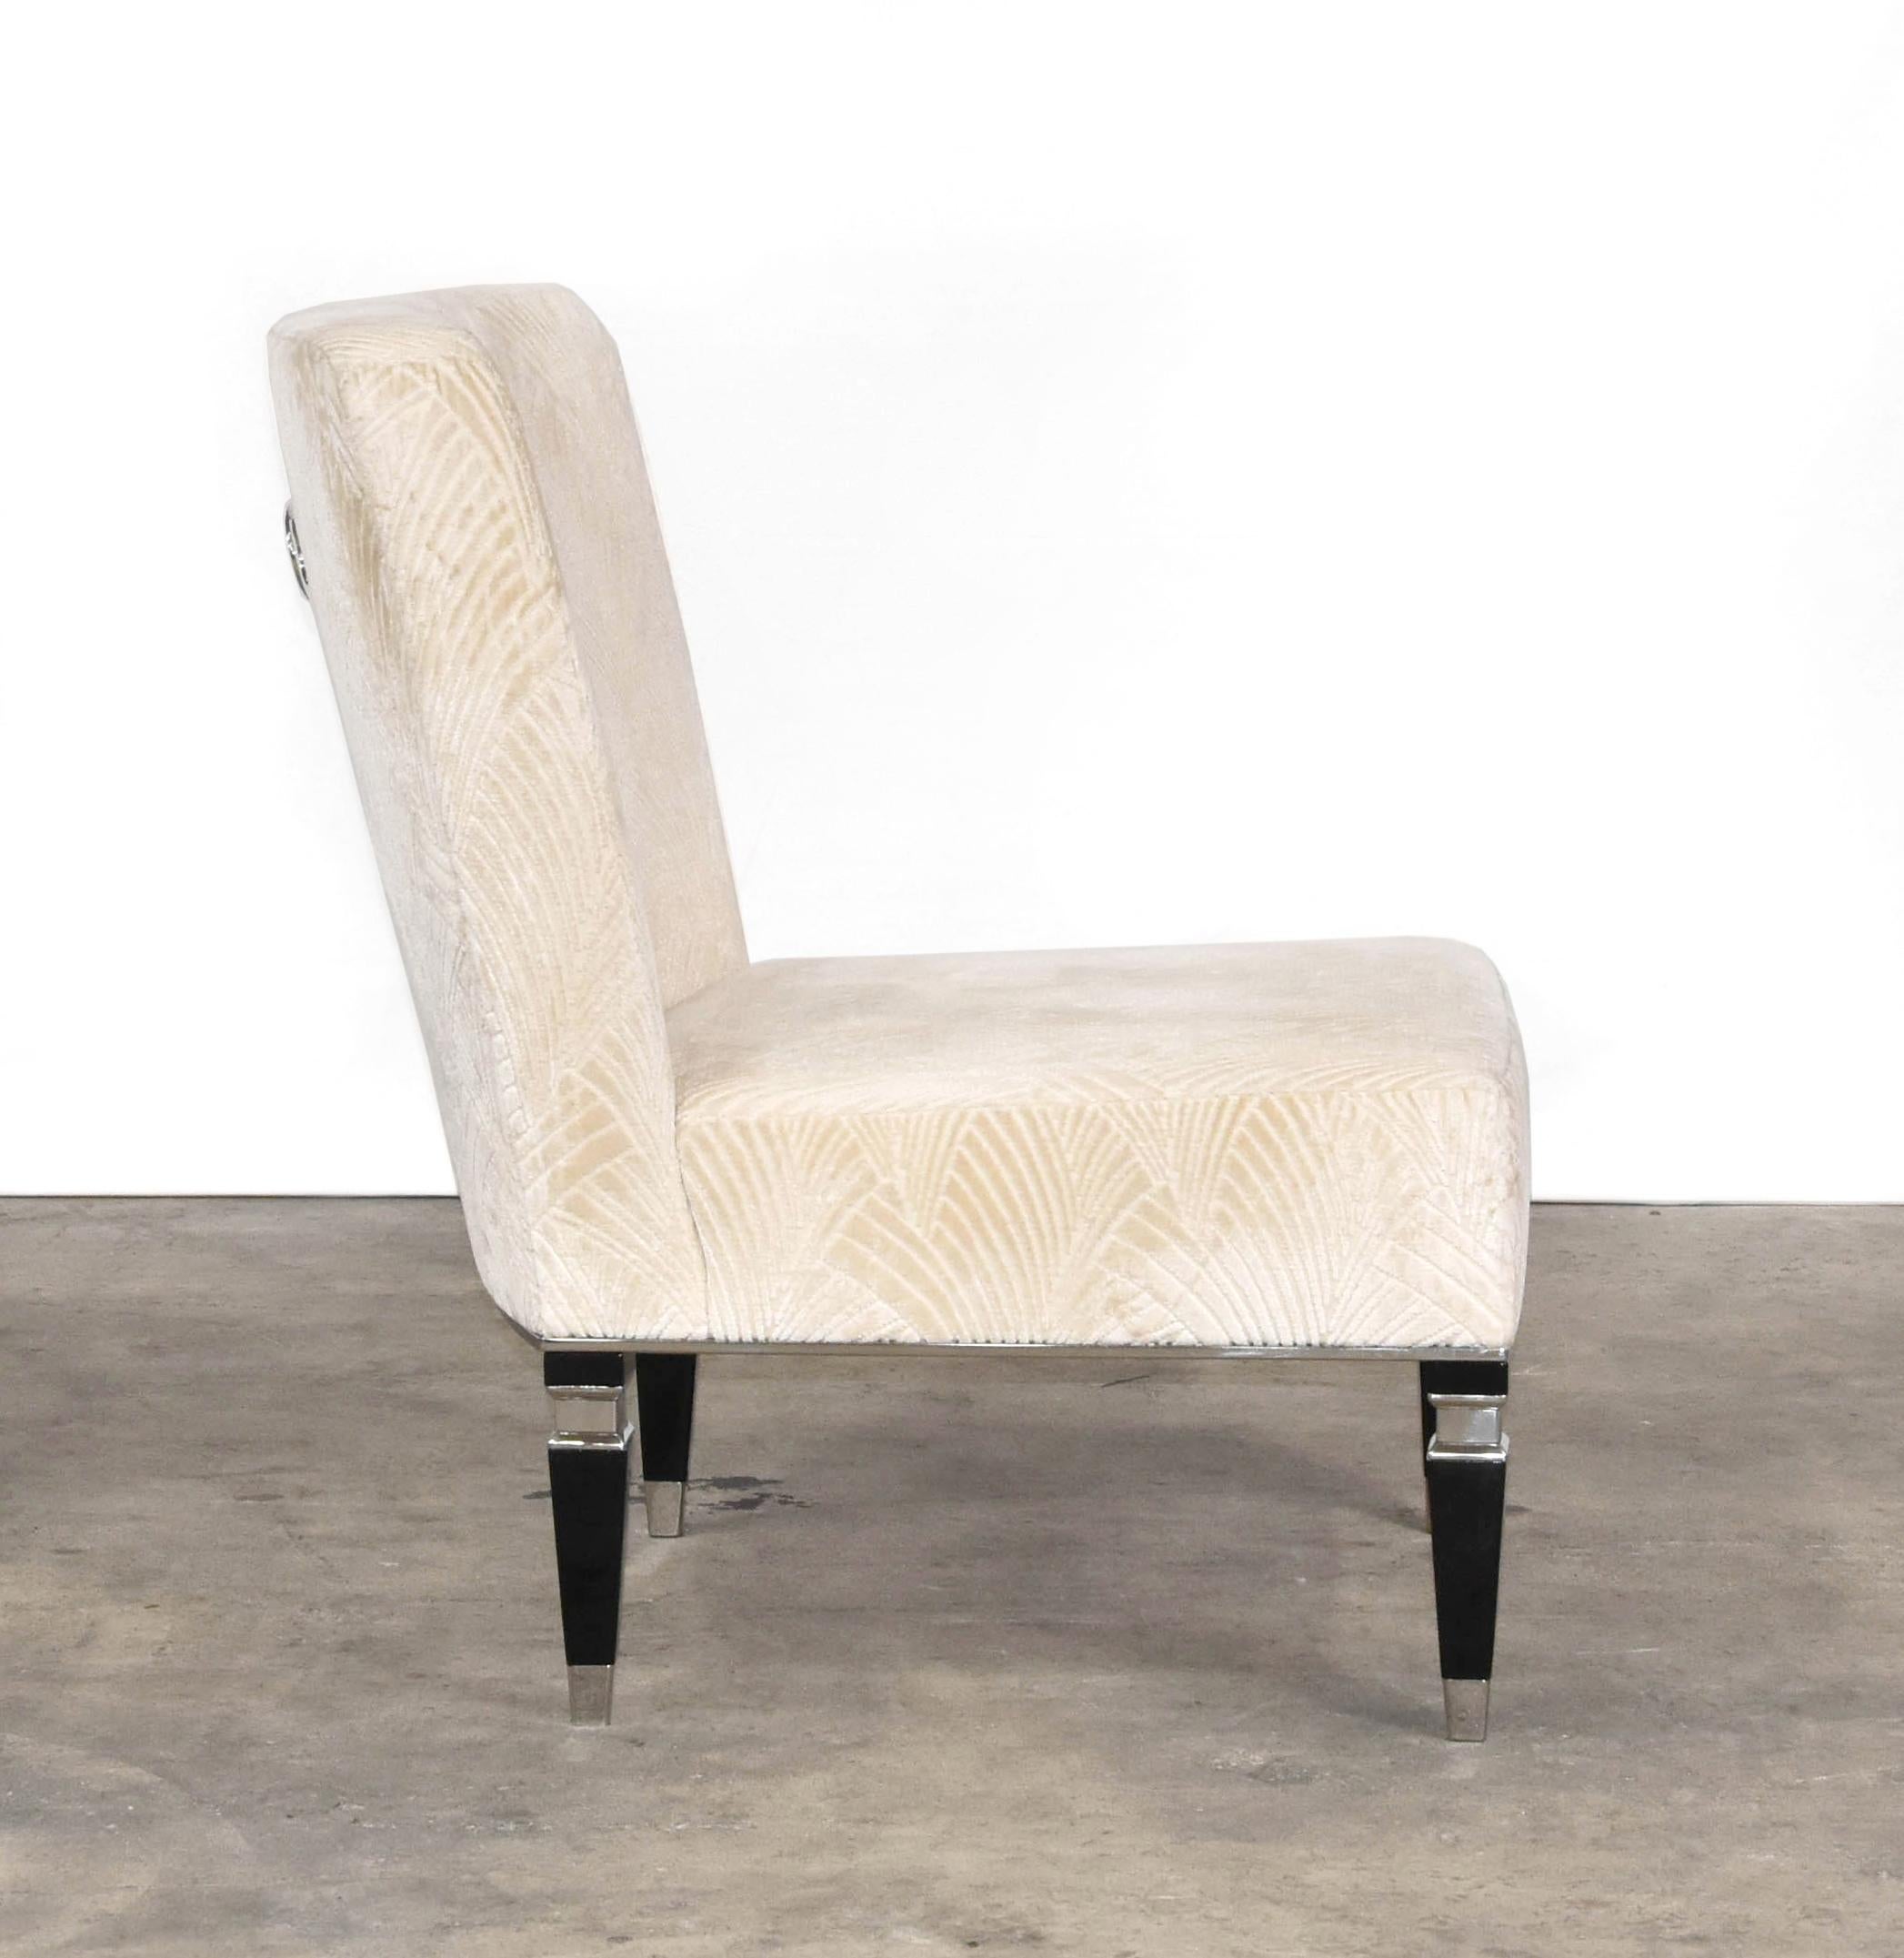 The Geneve Regency armchair features a deep seat upholstered in Art Deco inspired cream velvet, black lacquered feet and stainless steel accents.
 